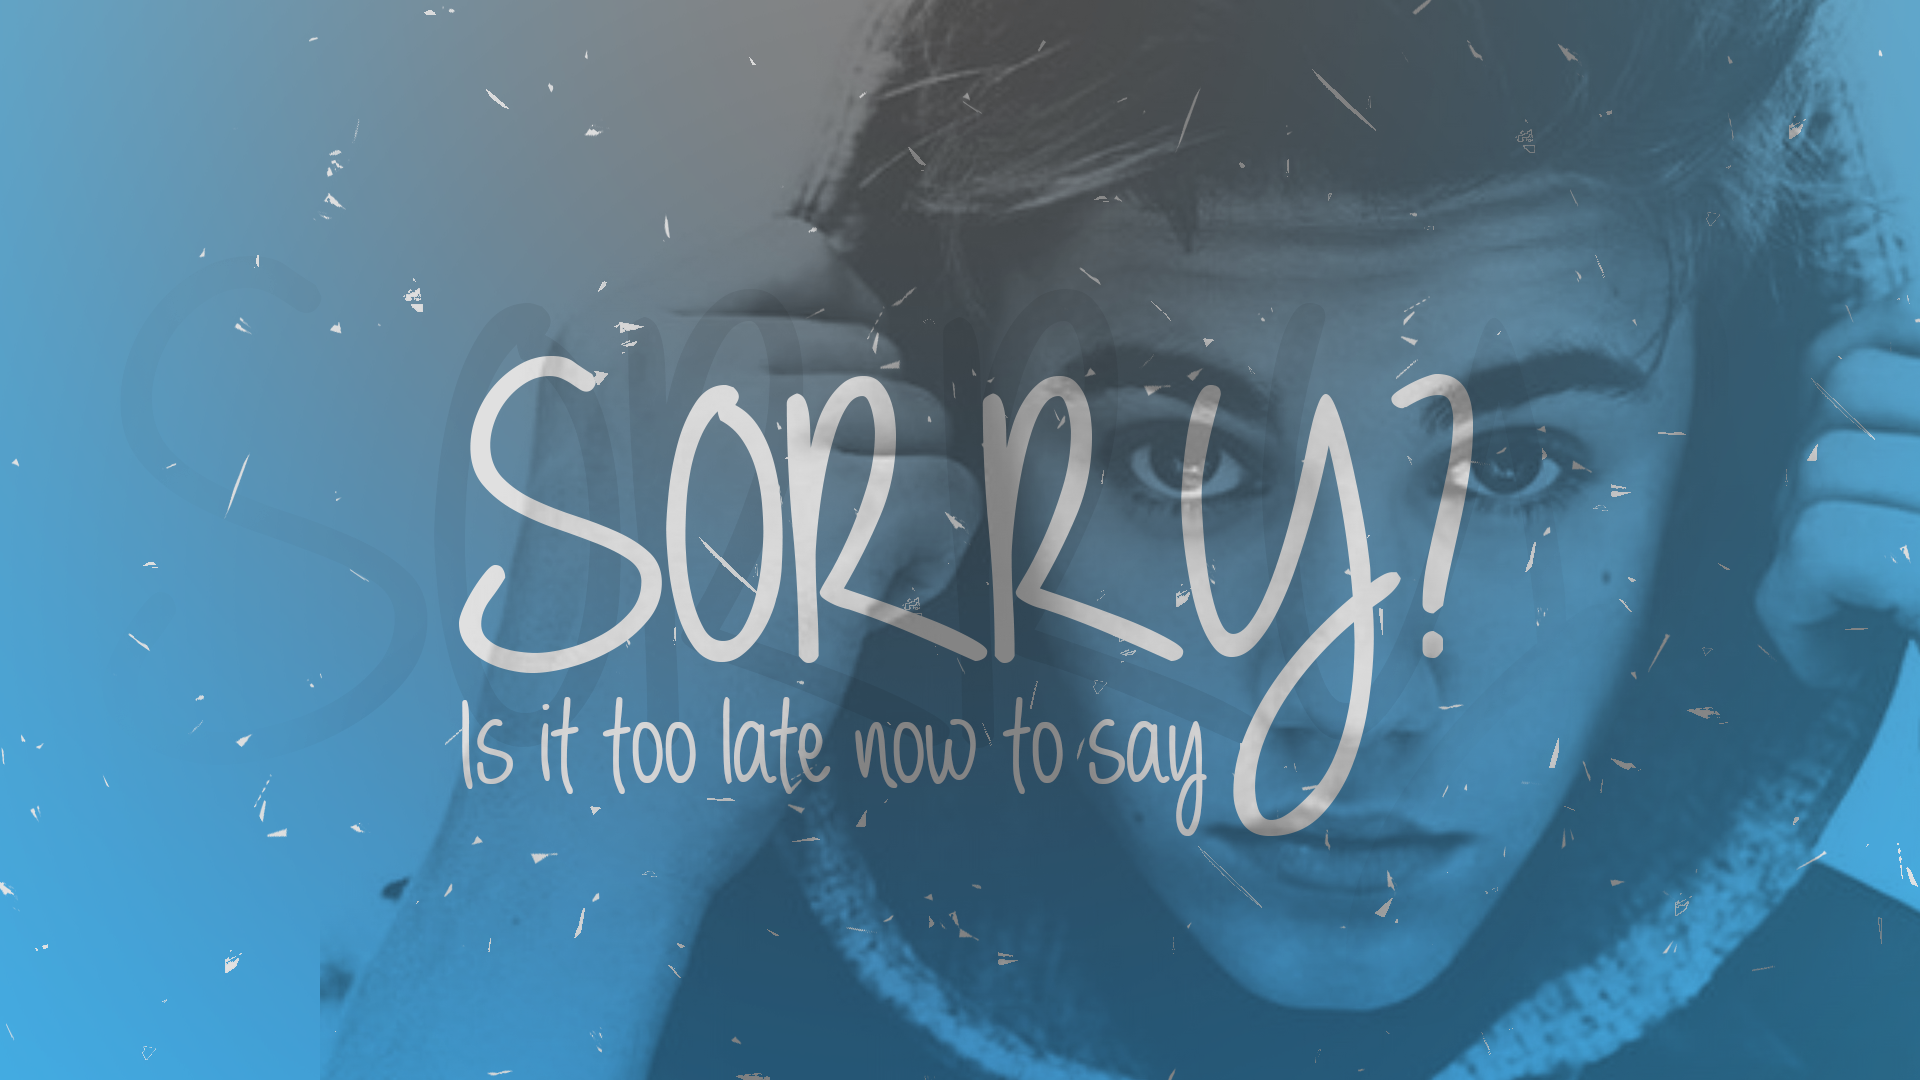 Sorry - Justin Bieber - Hd Justin Bieber Quotes , HD Wallpaper & Backgrounds